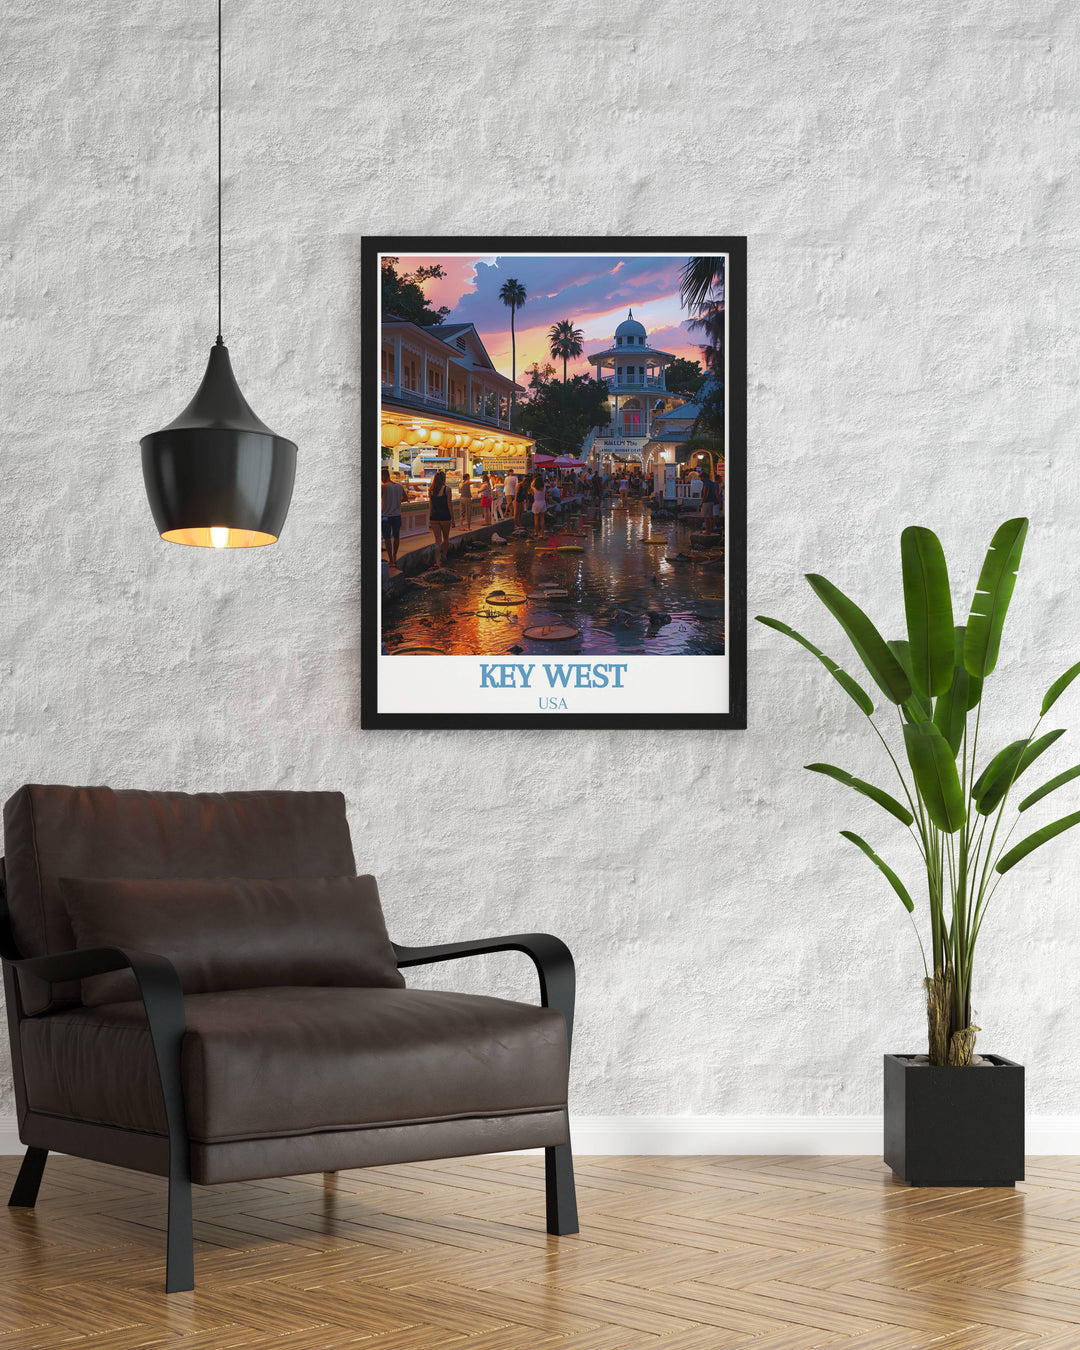 Exquisite Key West Wall Art of Mallory Square a must have Florida Art Poster that brings the lively spirit of this famous plaza to any room.